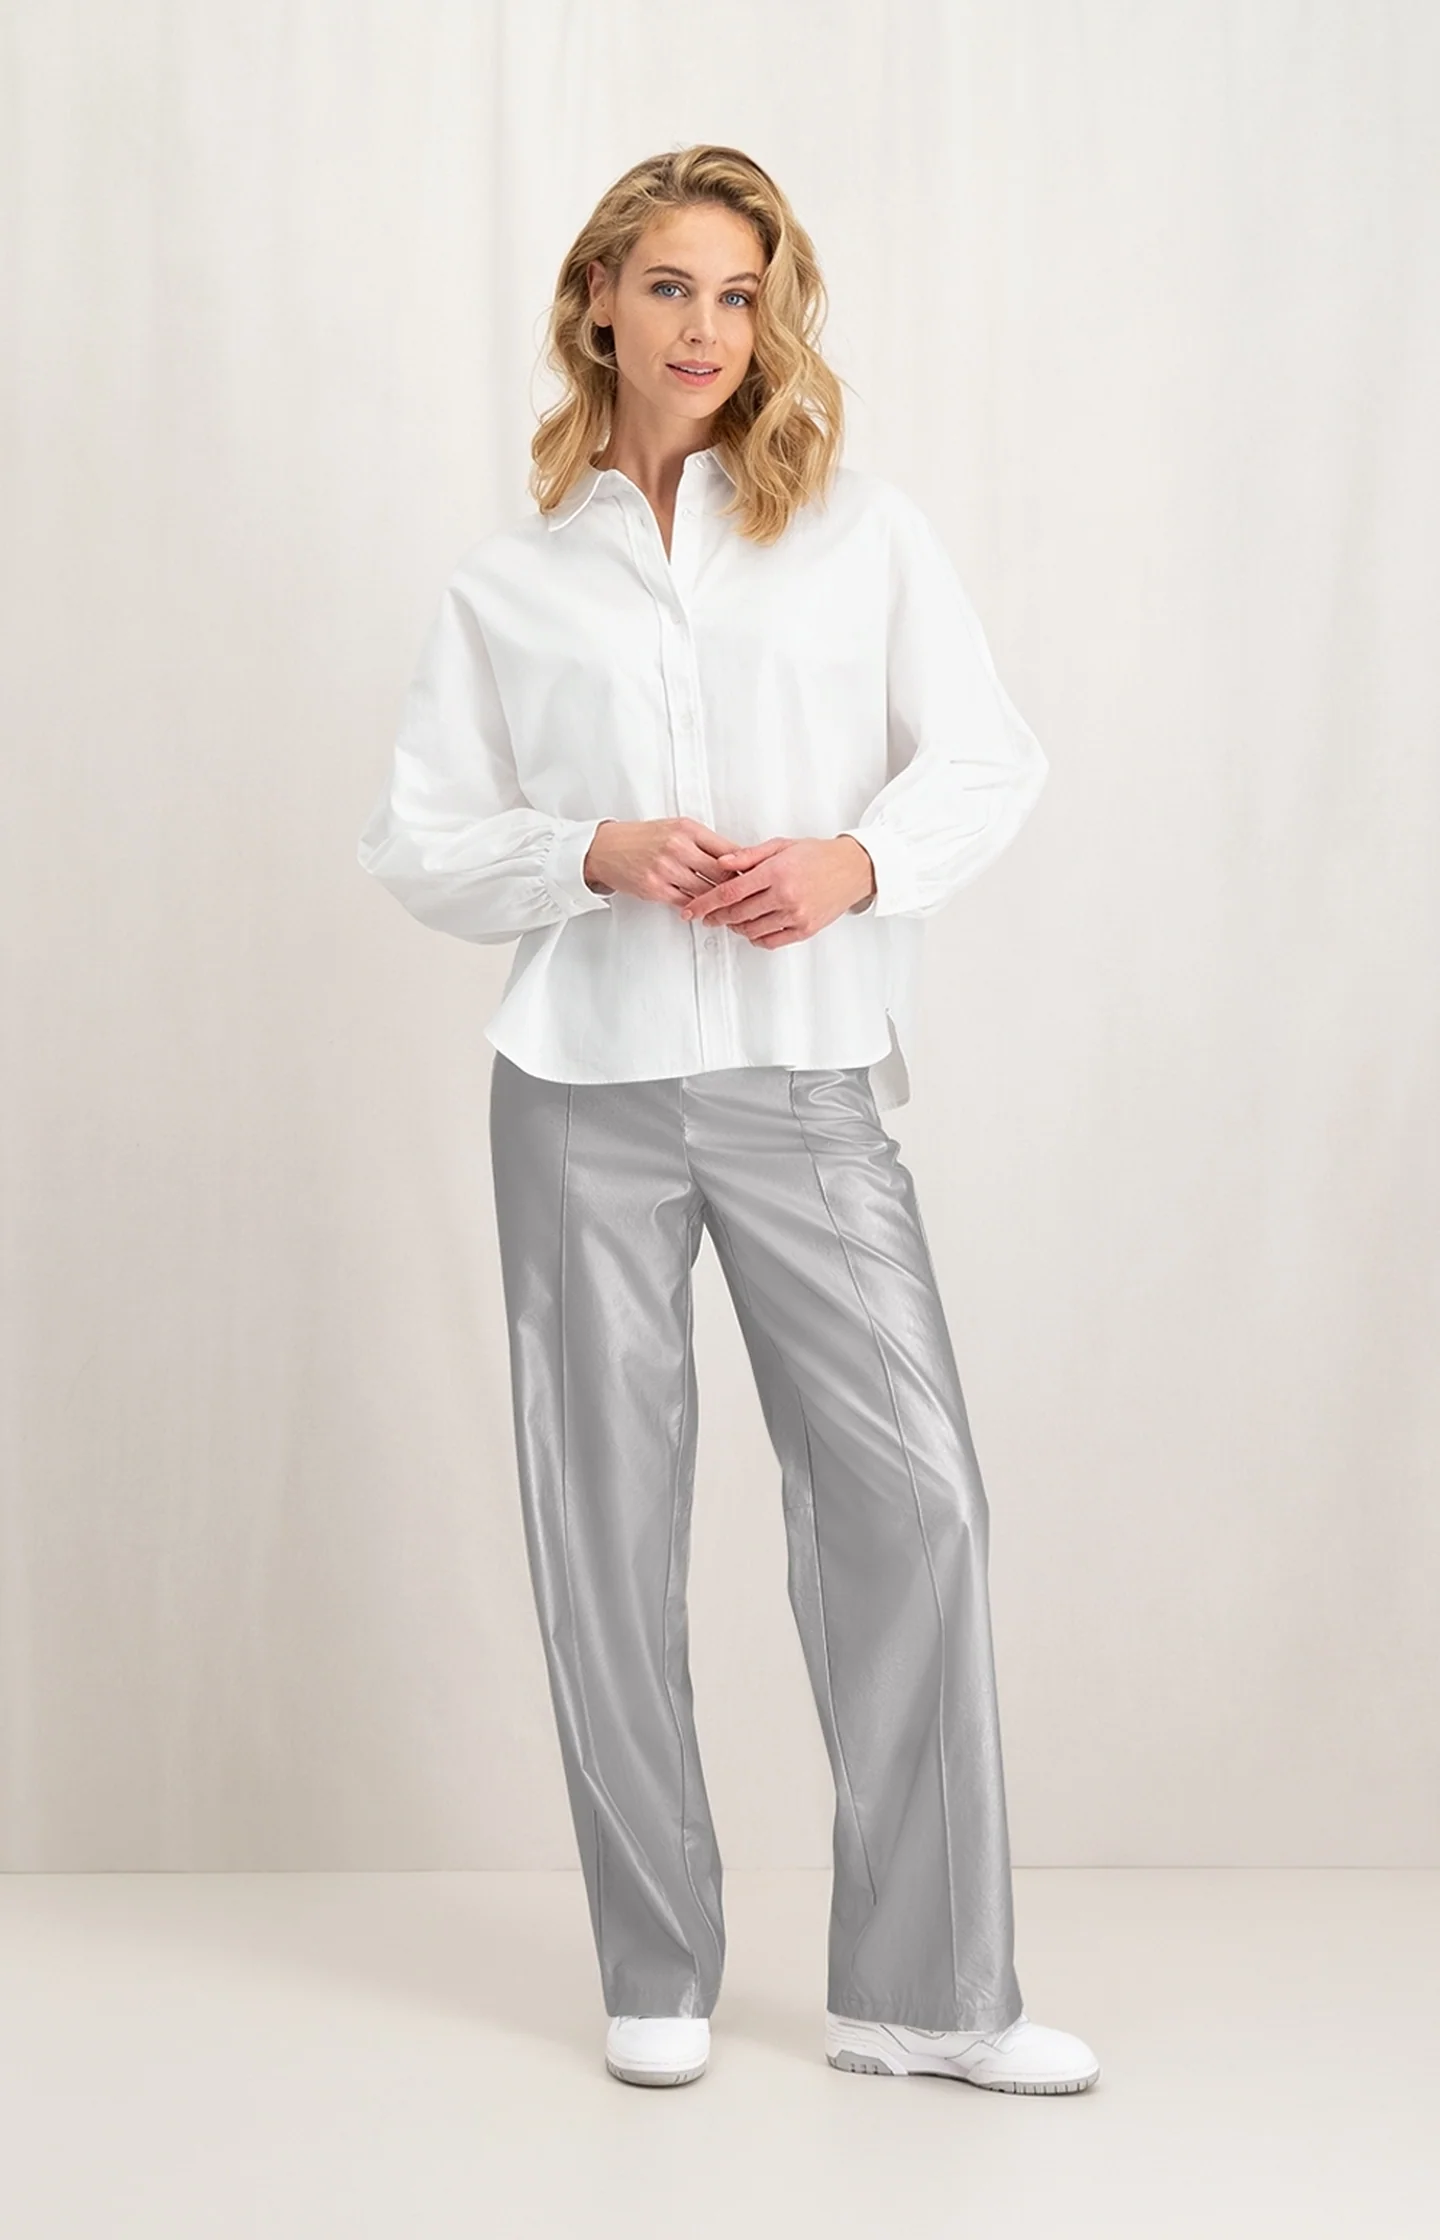 loose-fit-blouse-with-collar-and-long-balloon-sleeves-pure-white_57ea027f-1d9a-4696-a9b4-49a53cbca13e_1440x